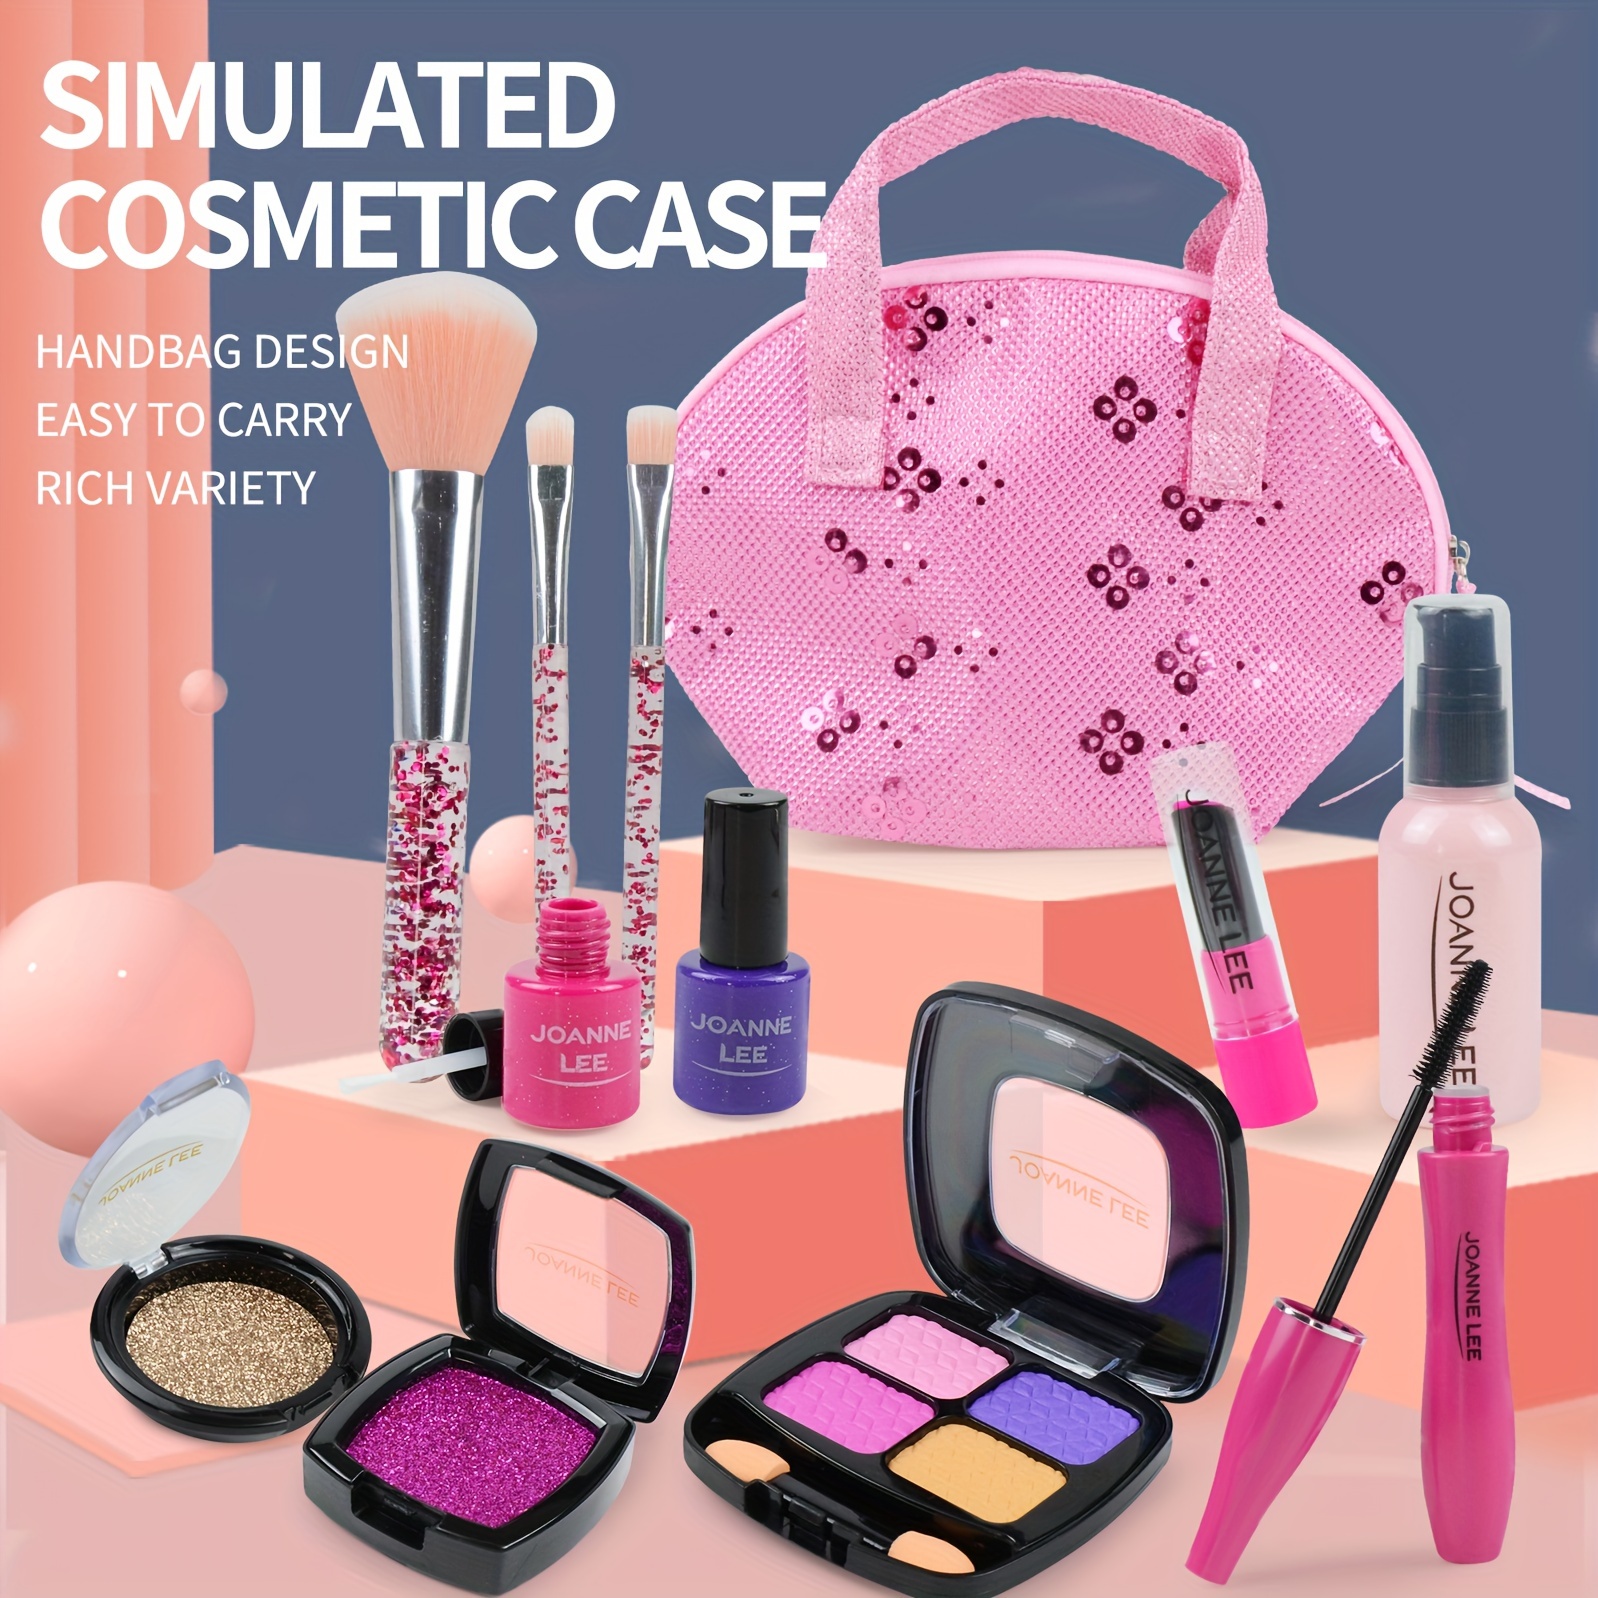 

glamour Playtime" Kids Pretend Play Makeup Kit For Girls - Includes Cosmetic Bag, Ideal Birthday & Christmas Gift, Toy Makeup Set For Toddlers & Little Girls Ages 3-6 (not Real Makeup)